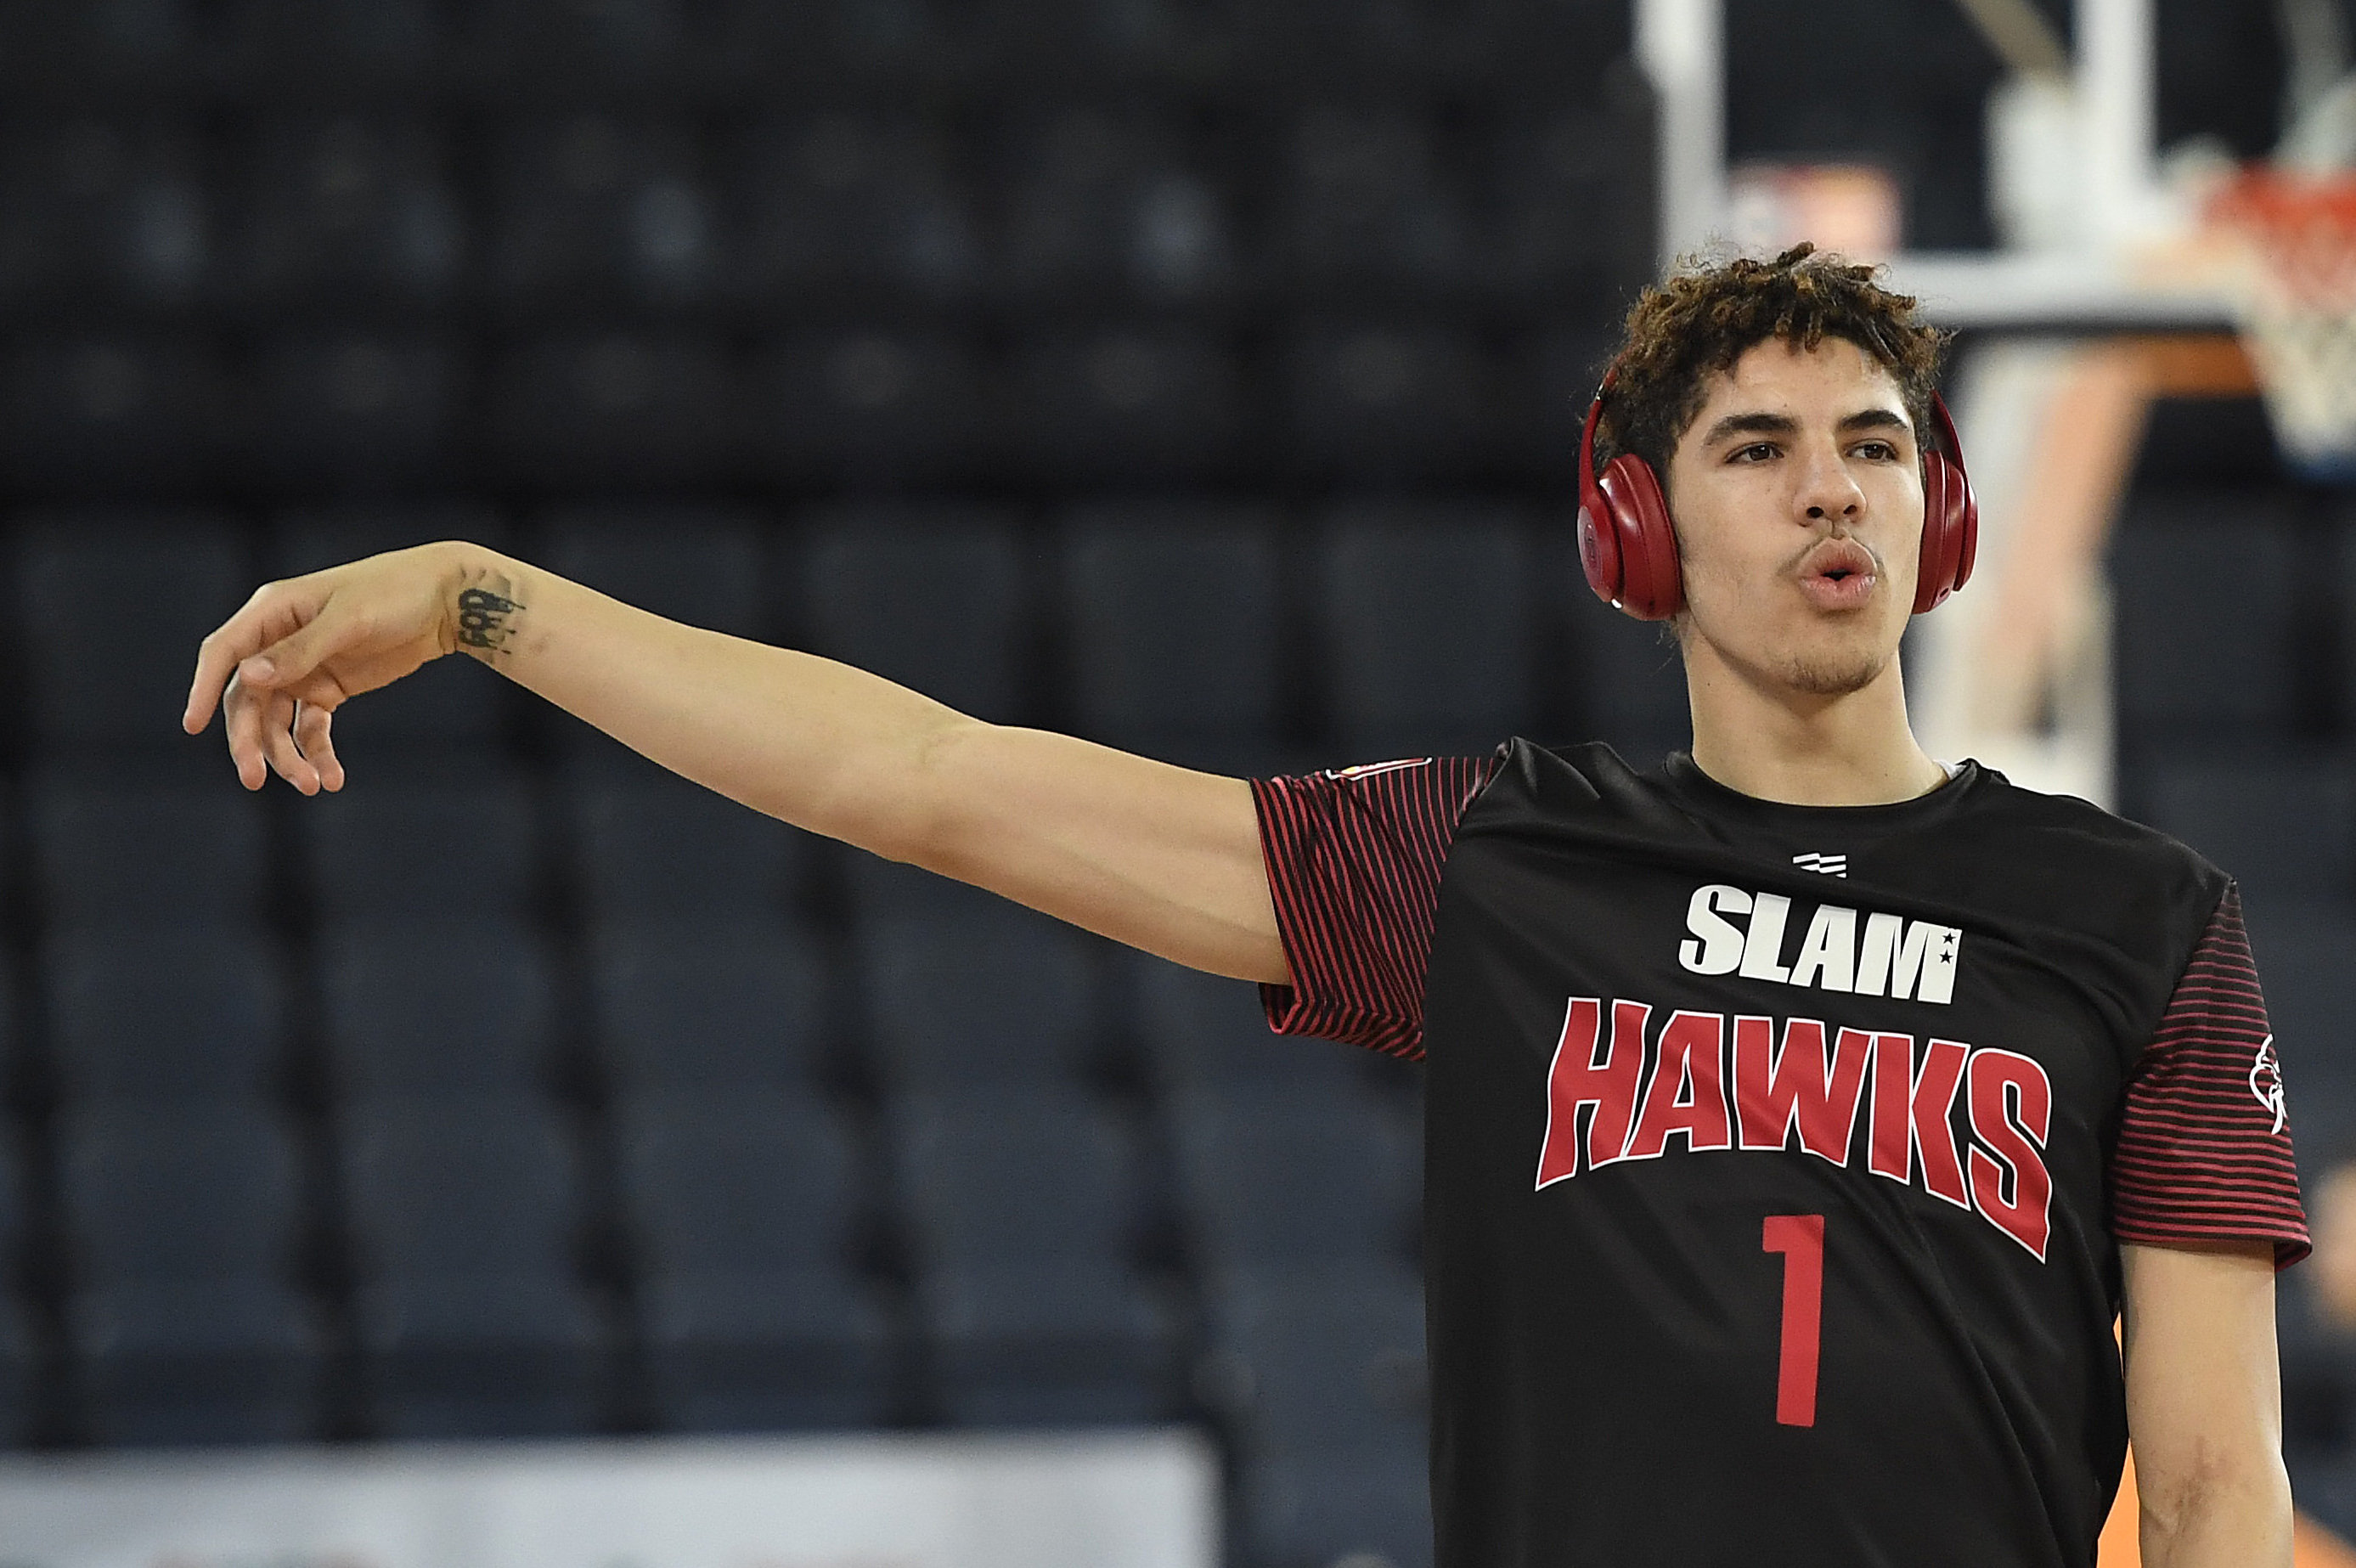 The Life Of Lamelo Bleacher Report Latest News Videos And Highlights